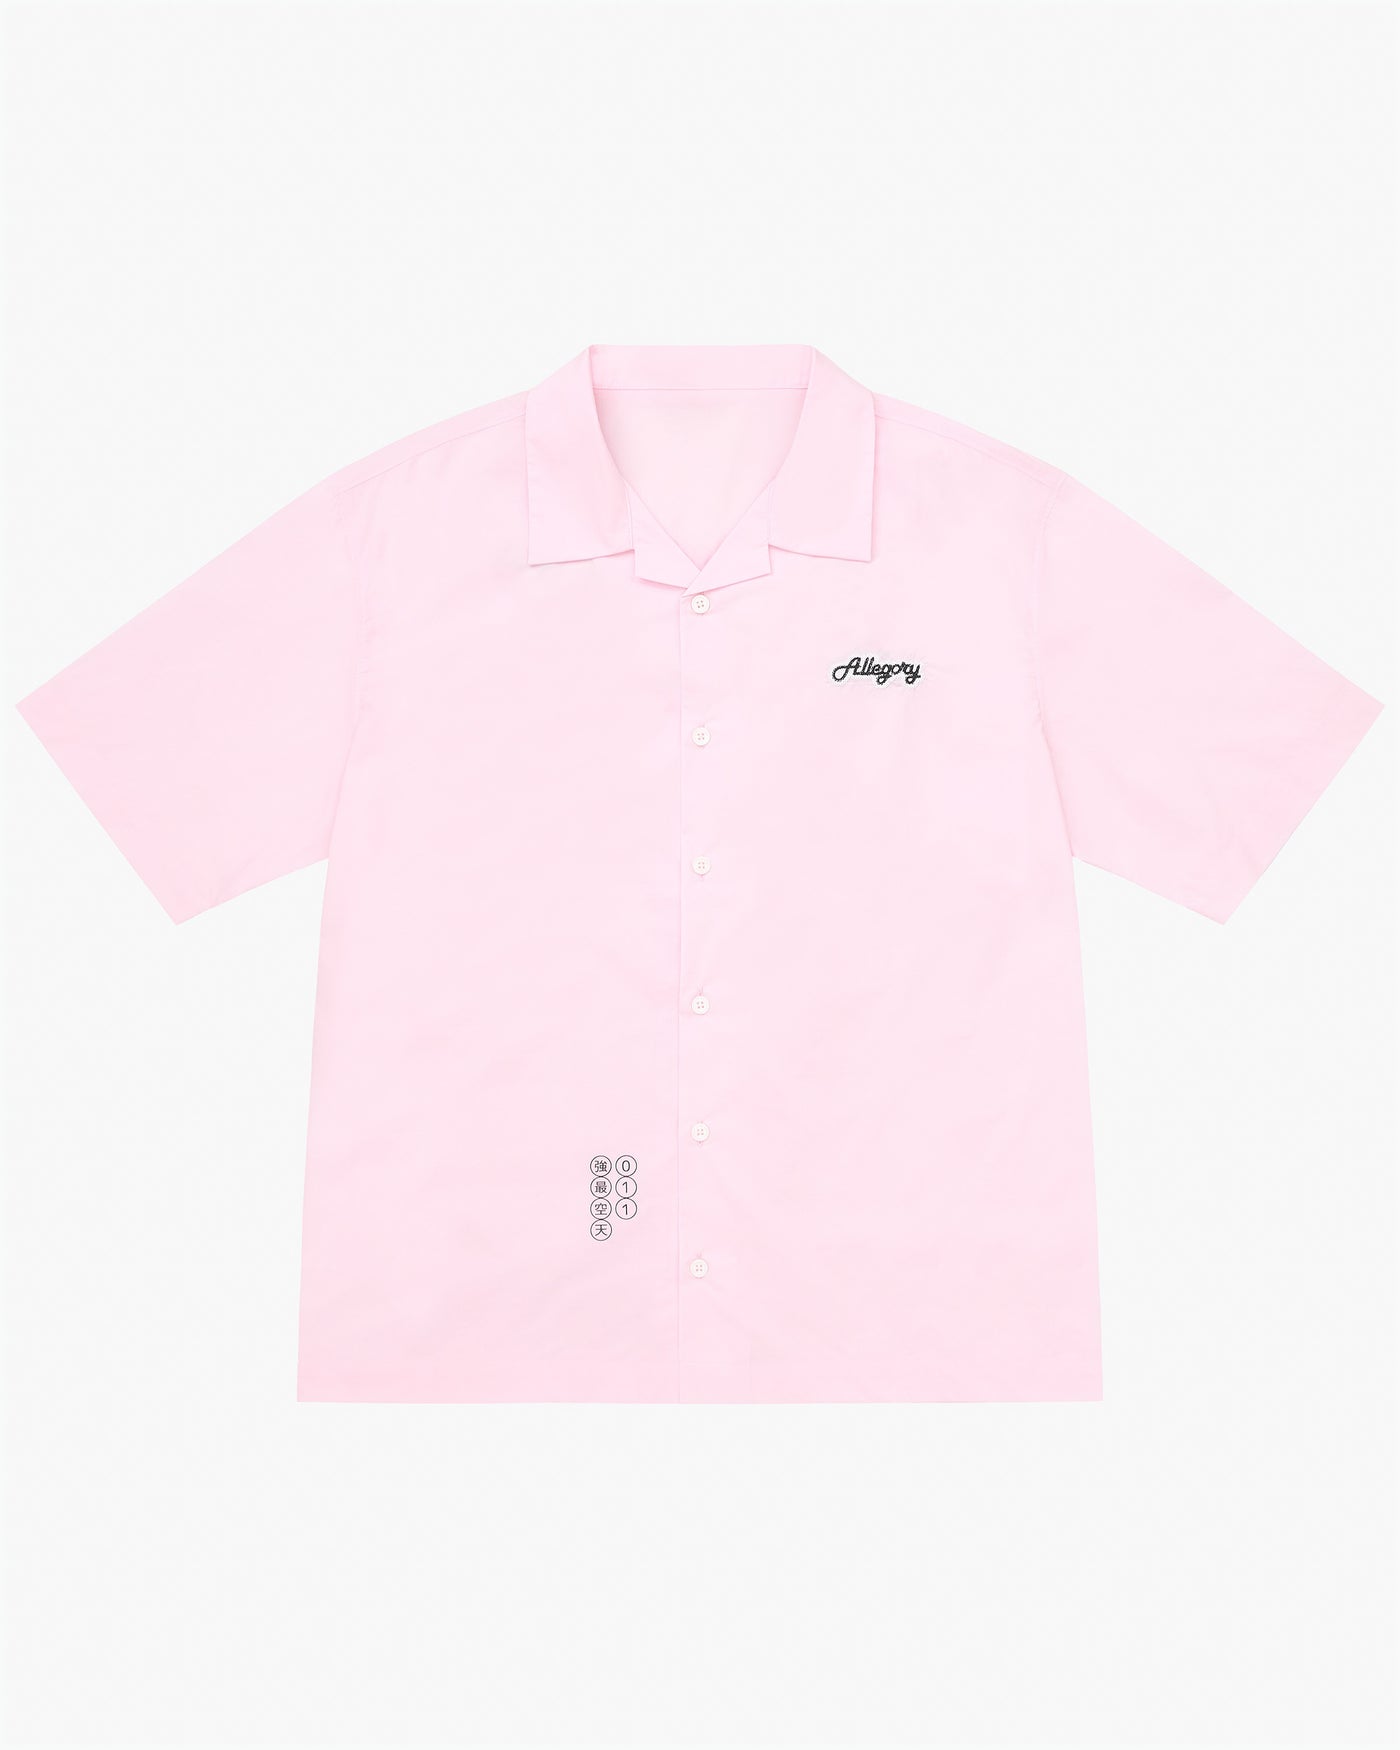 BADMAN Vacation Button Up Tee / Sun-Dried Pink